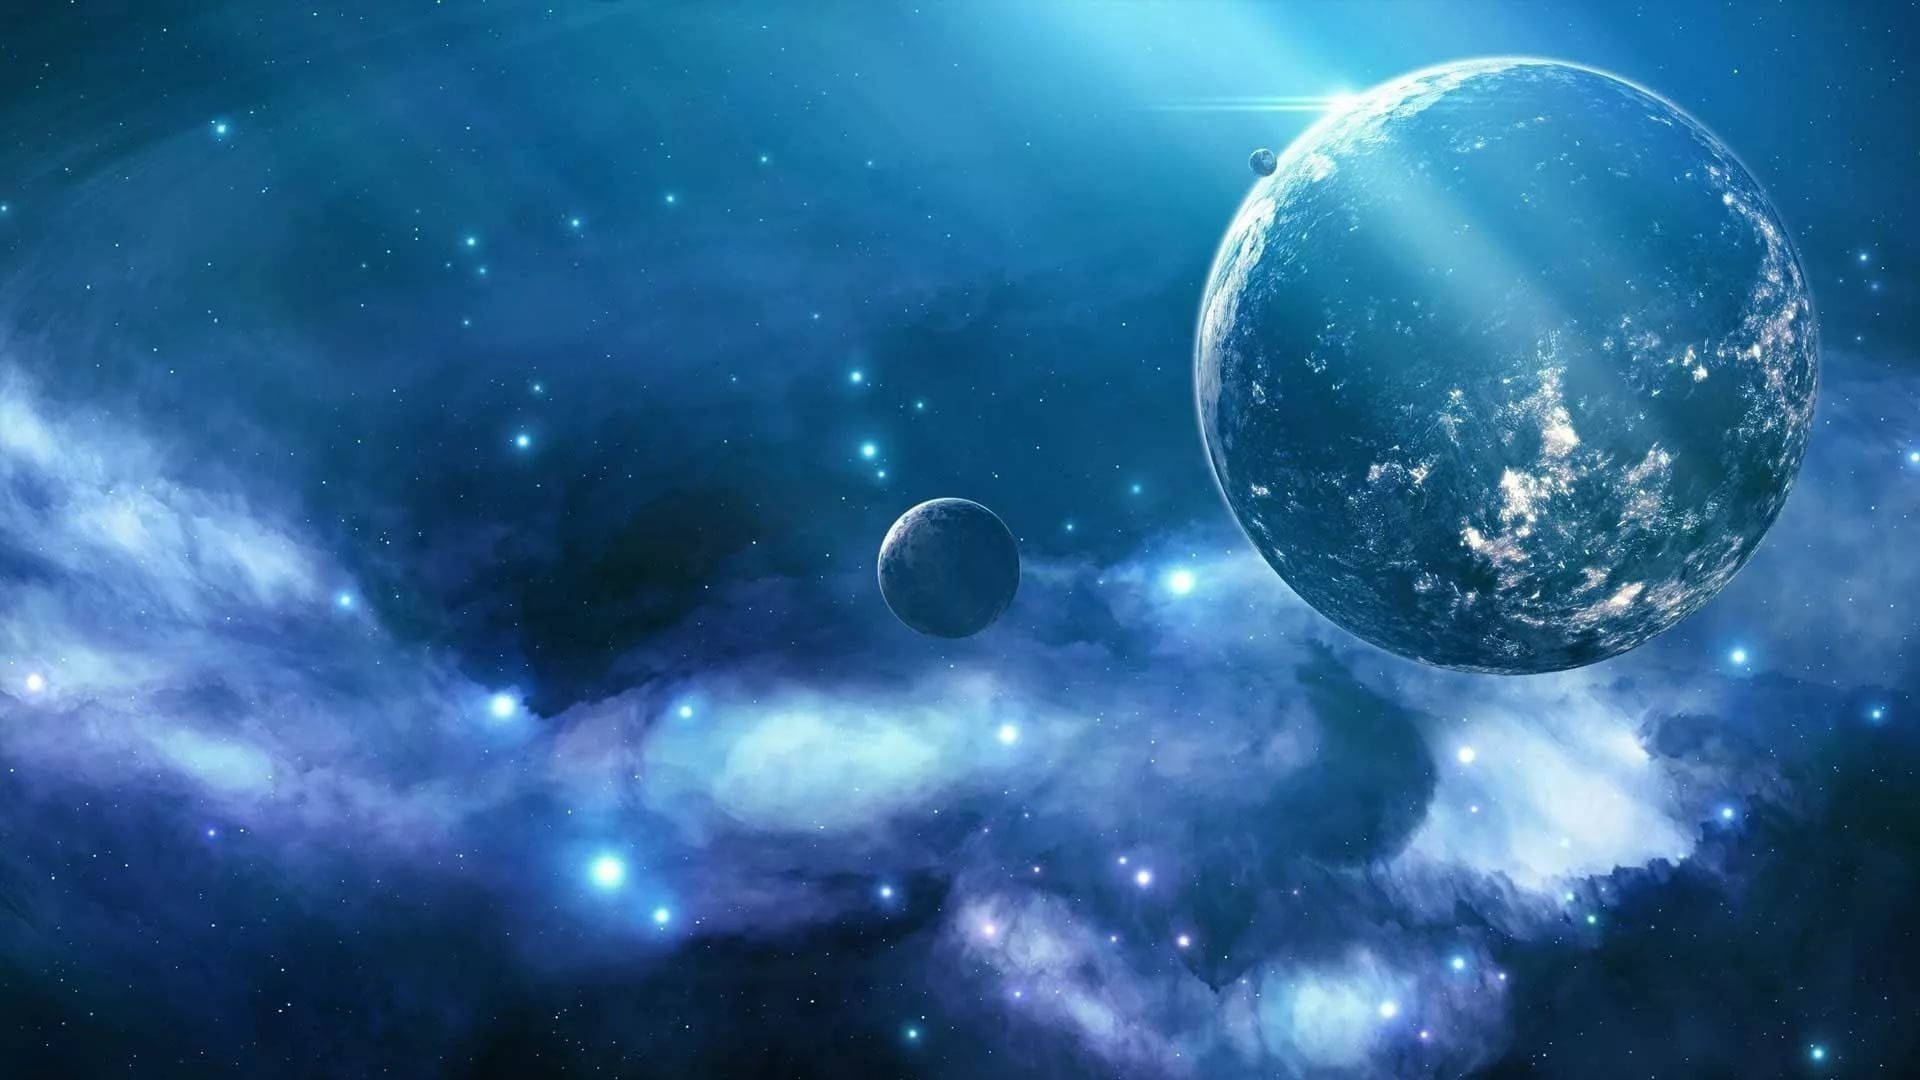 Two Planets In Blue Galaxy Background